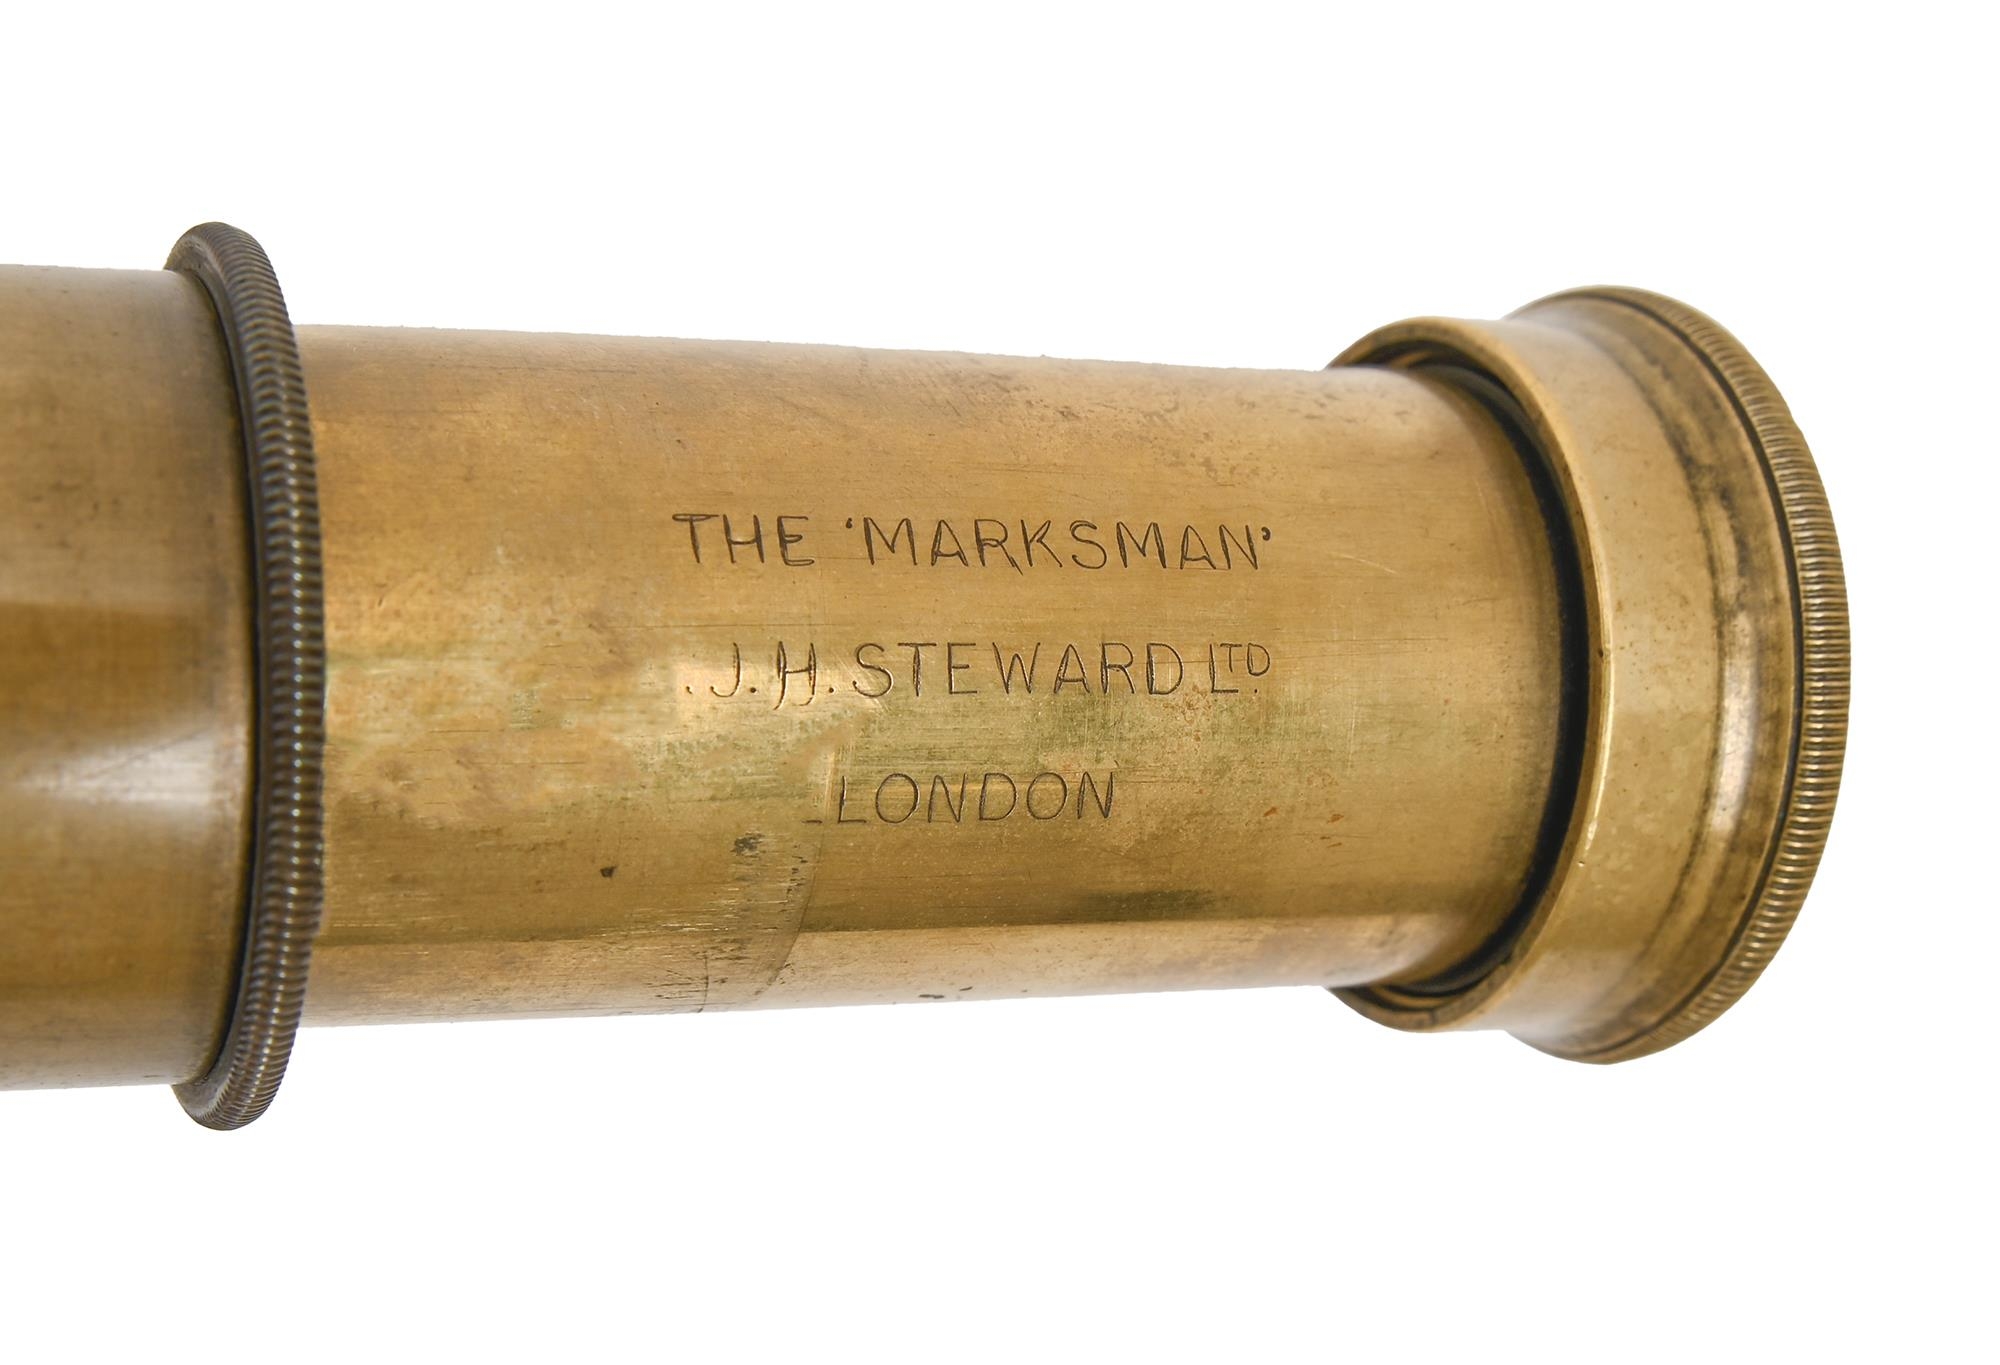 A 1.75" brass refracting telescope, The 'Marksman' J H Steward, London, c1900, with stitched leather - Image 2 of 2